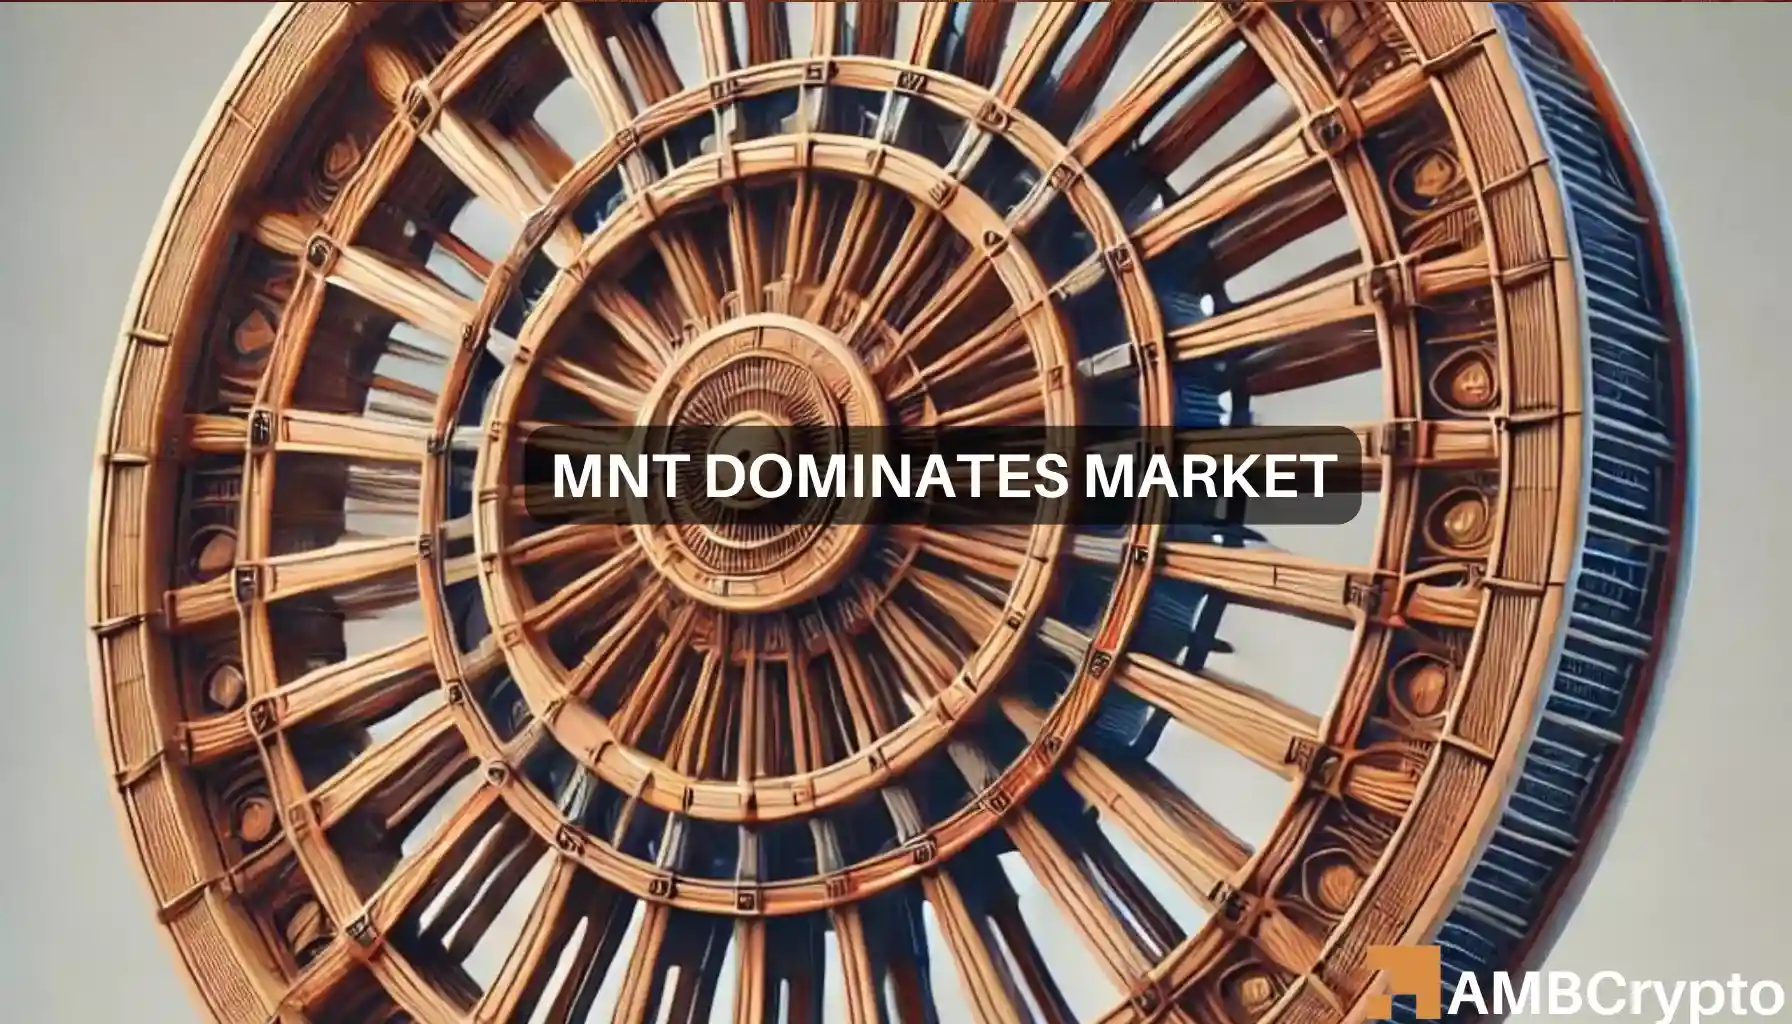 Mantle token sets new ATH with stellar 7% gain: What's next for MNT?